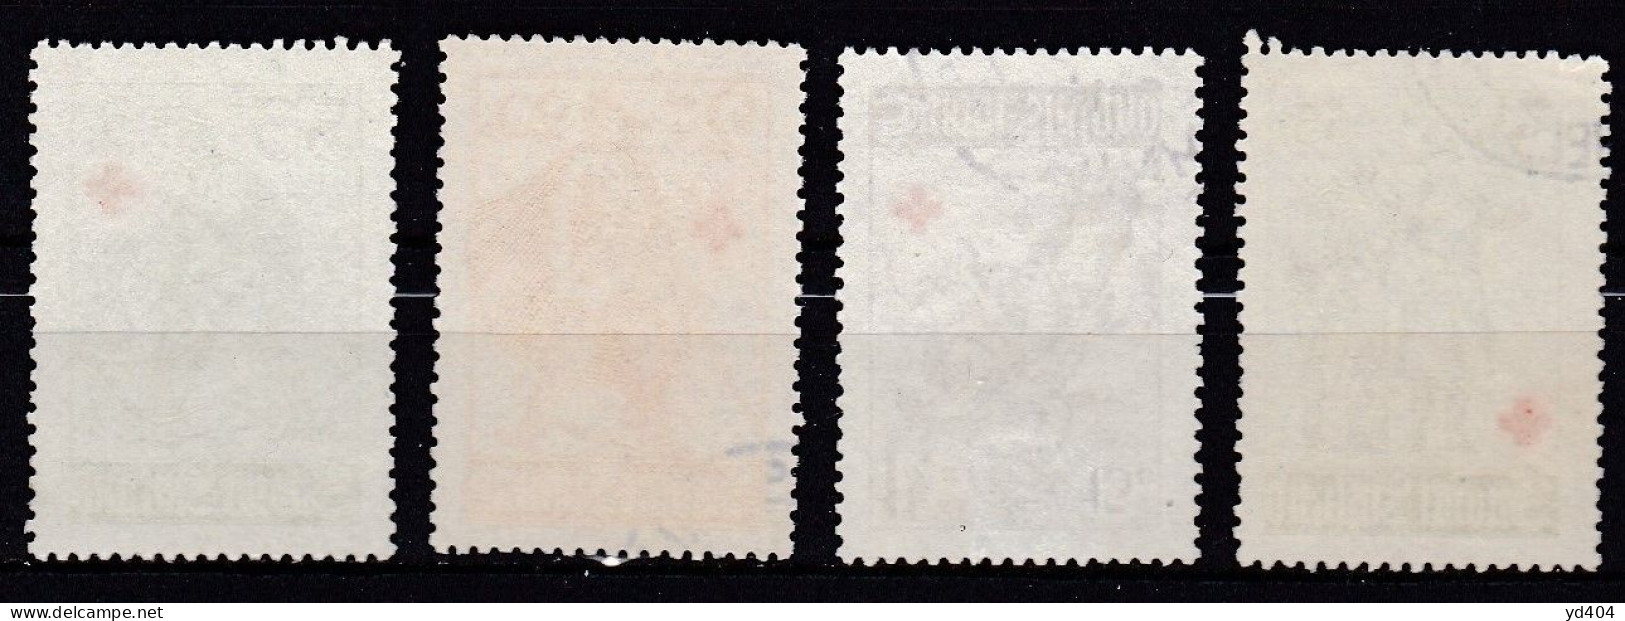 FI059 – FINLANDE – FINLAND – 1940 – RED CROSS FUND – SG 335/38 USED 14 € - Used Stamps